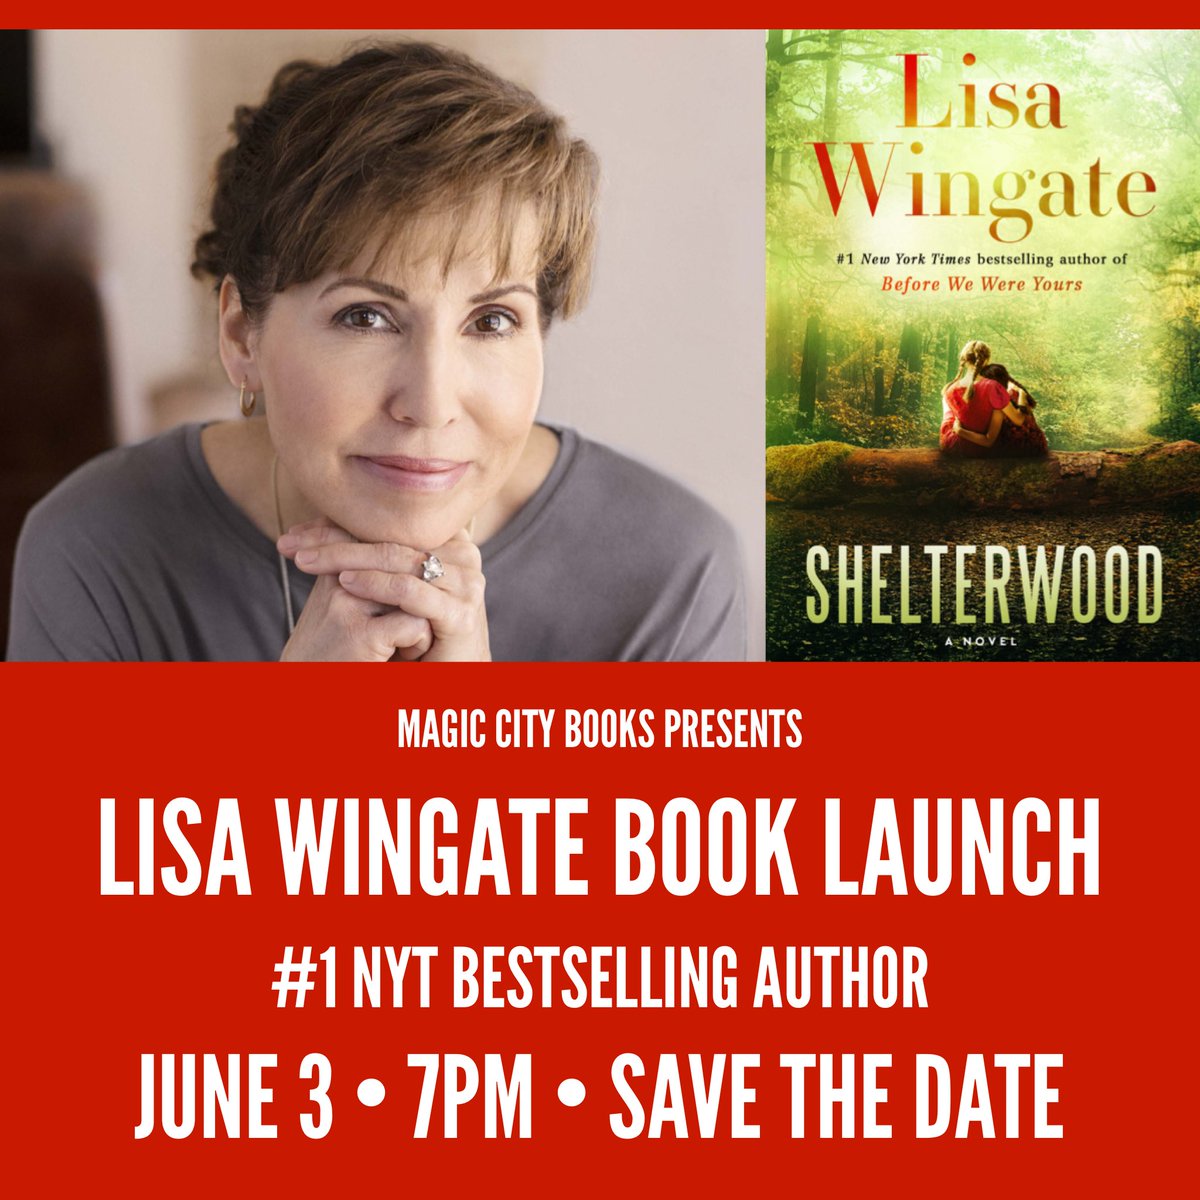 Less than a month until we host the official book launch for #1 NYT Bestseller LISA WINGATE! Tix on sale now at magiccitybooks.com